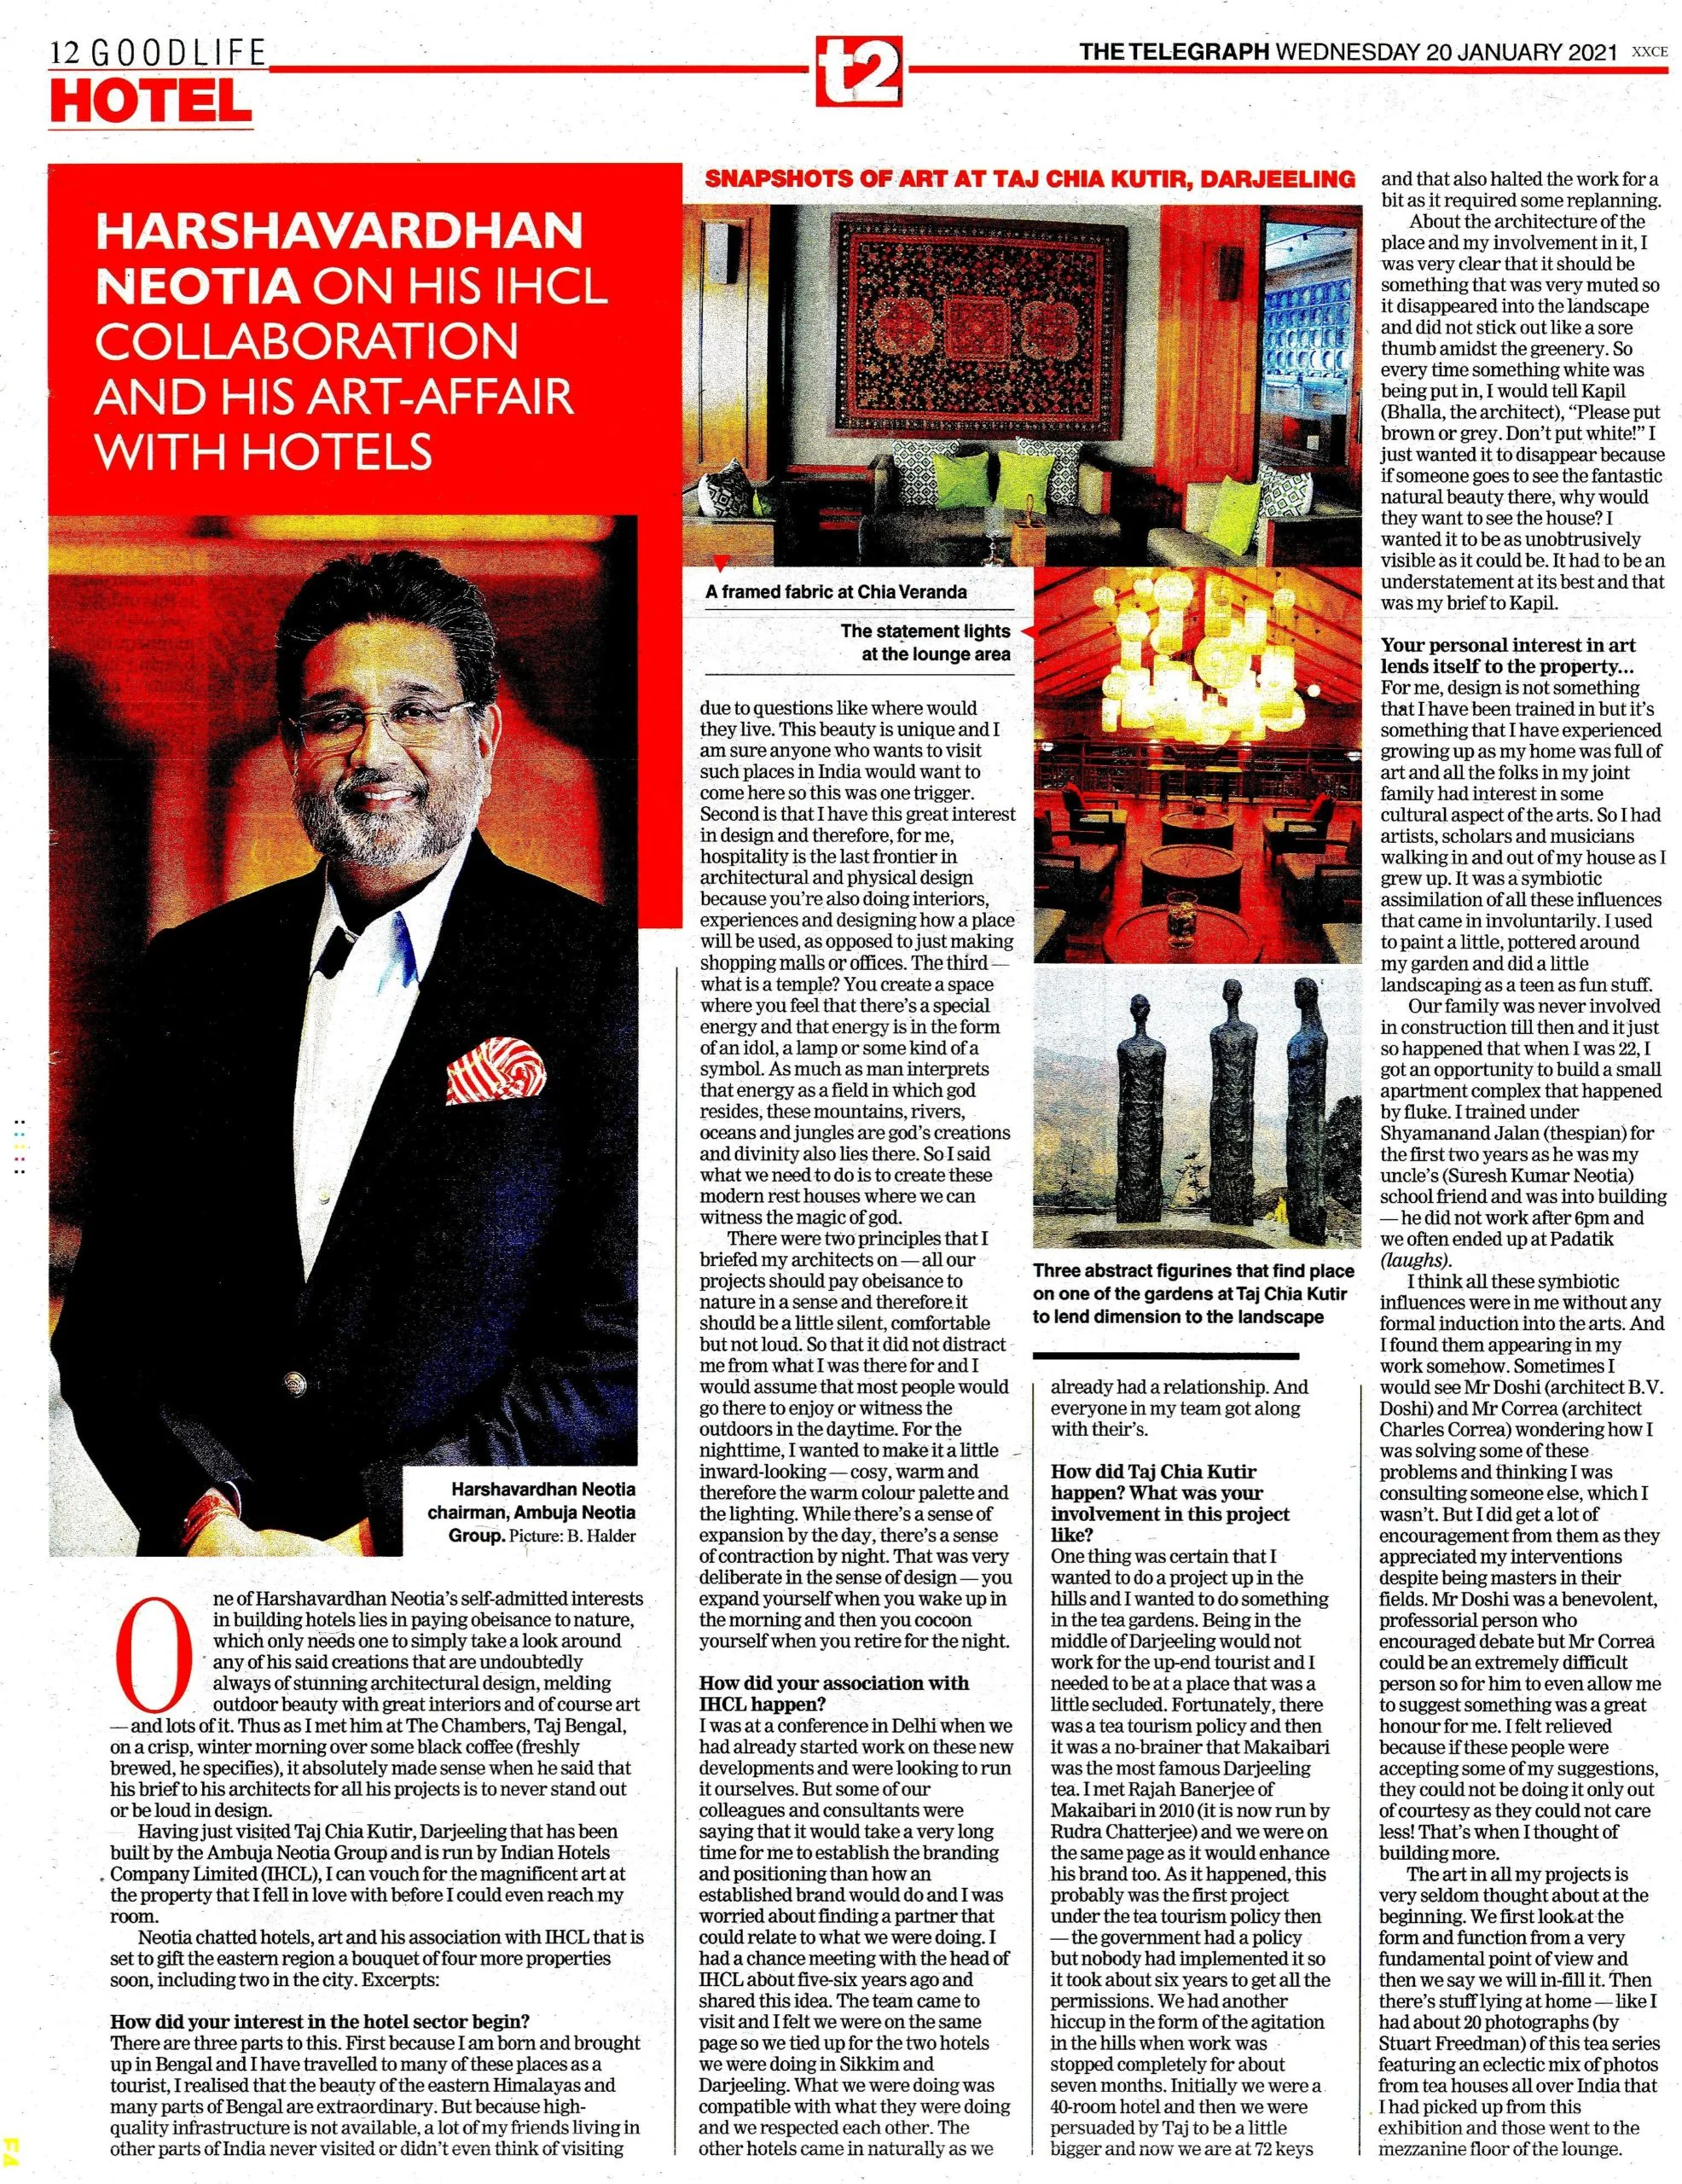 Harshvardhan Neotia on his IHCL collaboration and his art-affiar with hotels – The Telegraph